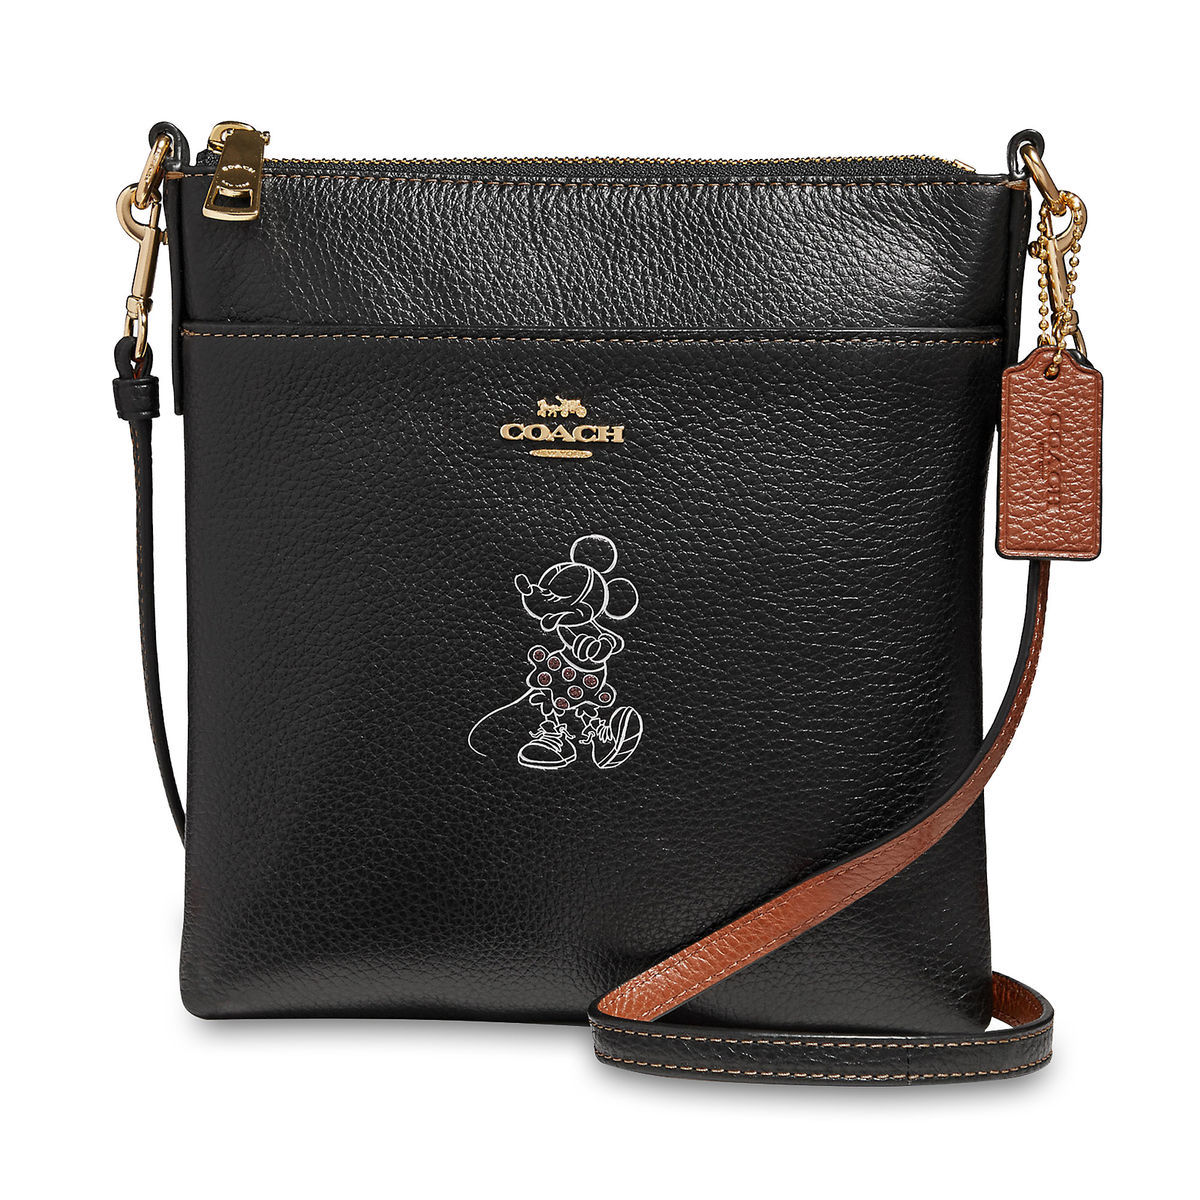 New Disney x Coach Collection Out Now | | 0 | Disney | Marvel | Star Wars ...